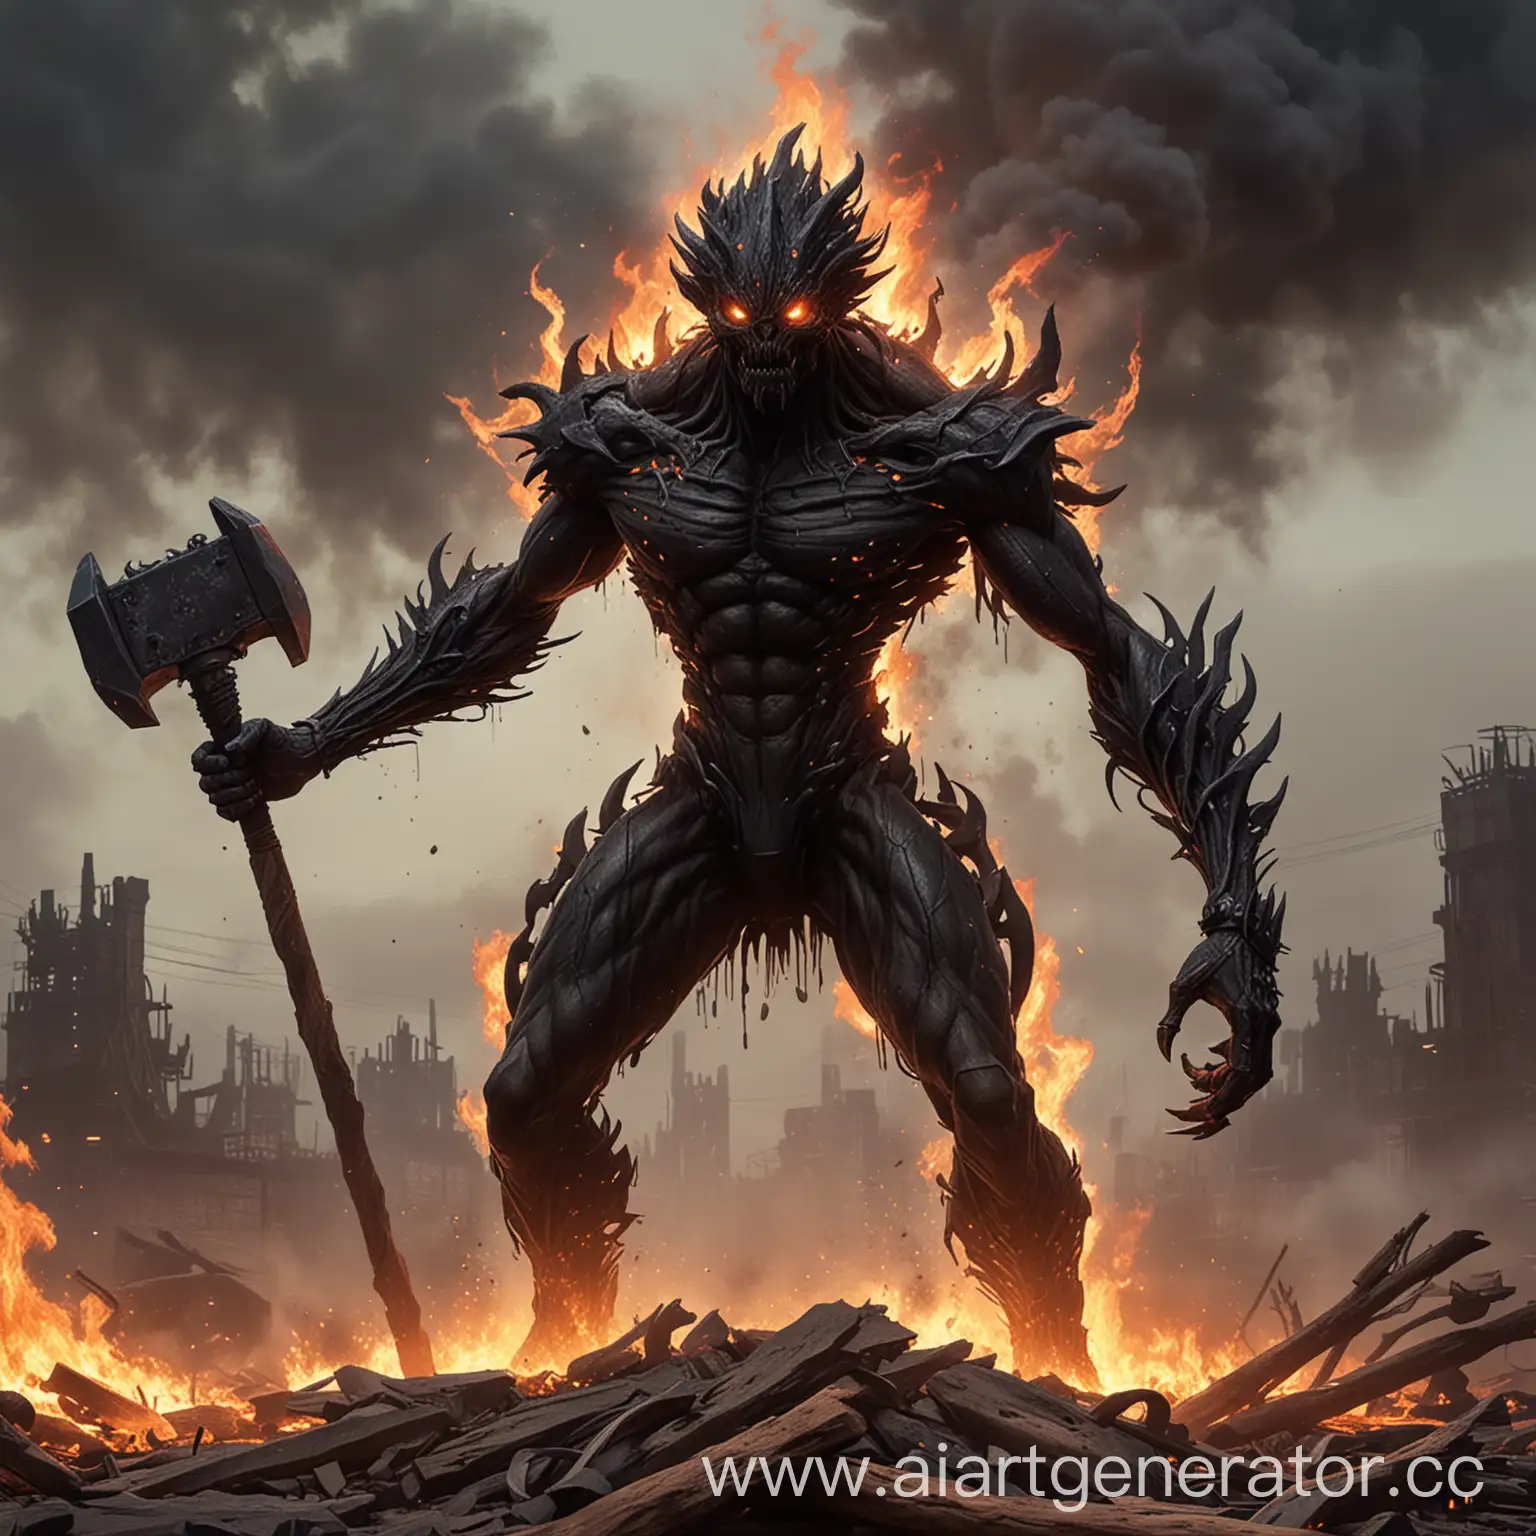 Sinister-Black-Monster-with-Six-Arms-and-Burning-Hammer